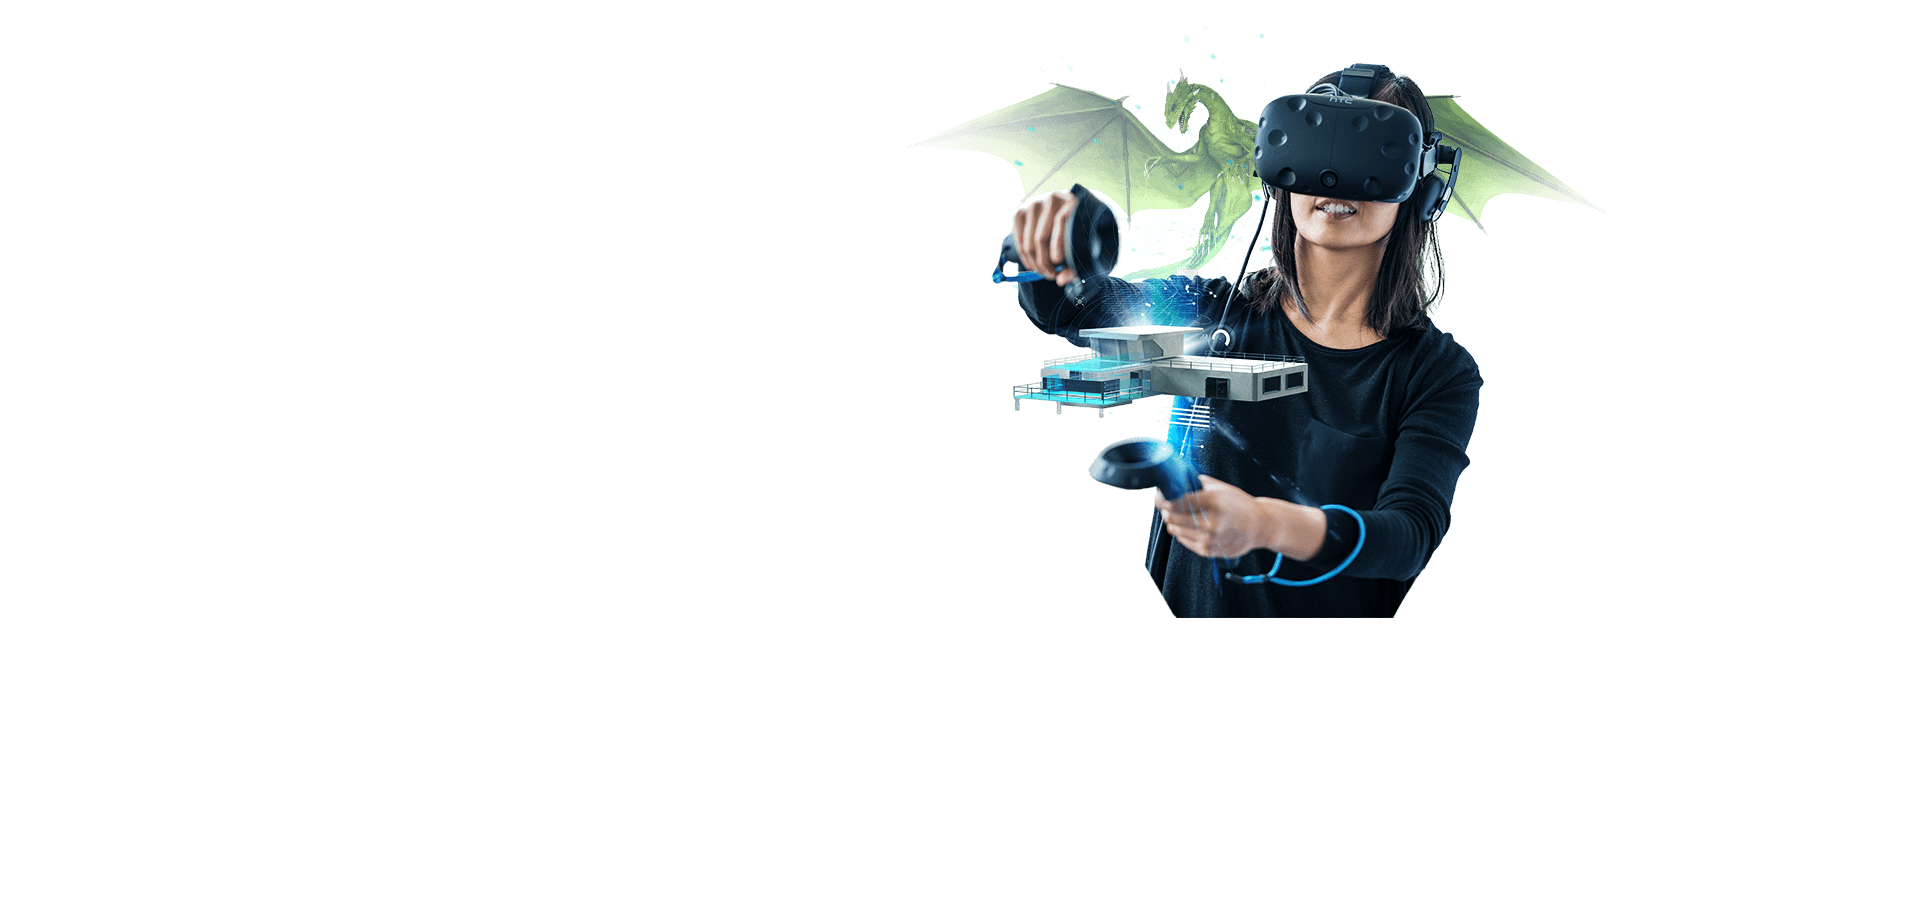 Composite portrait of a video game developer constructing a 3D model of a mansion in VR as a green dragon floats behind her head.